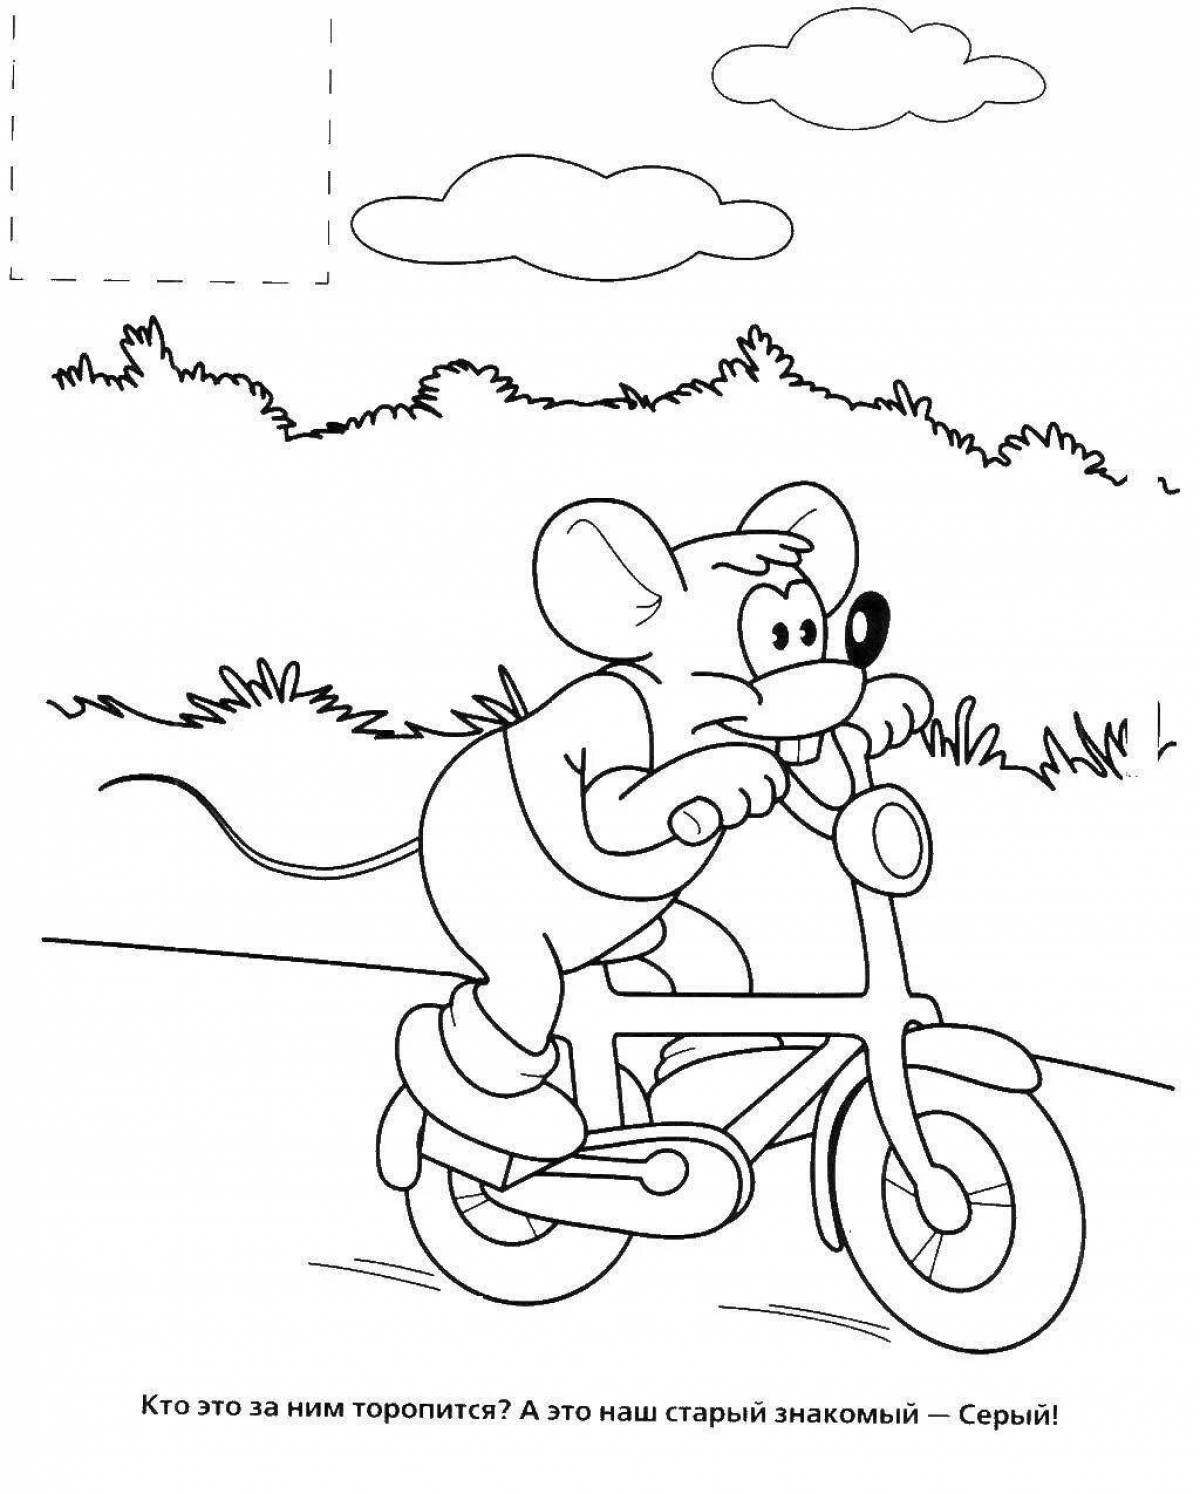 Charming leopold coloring book